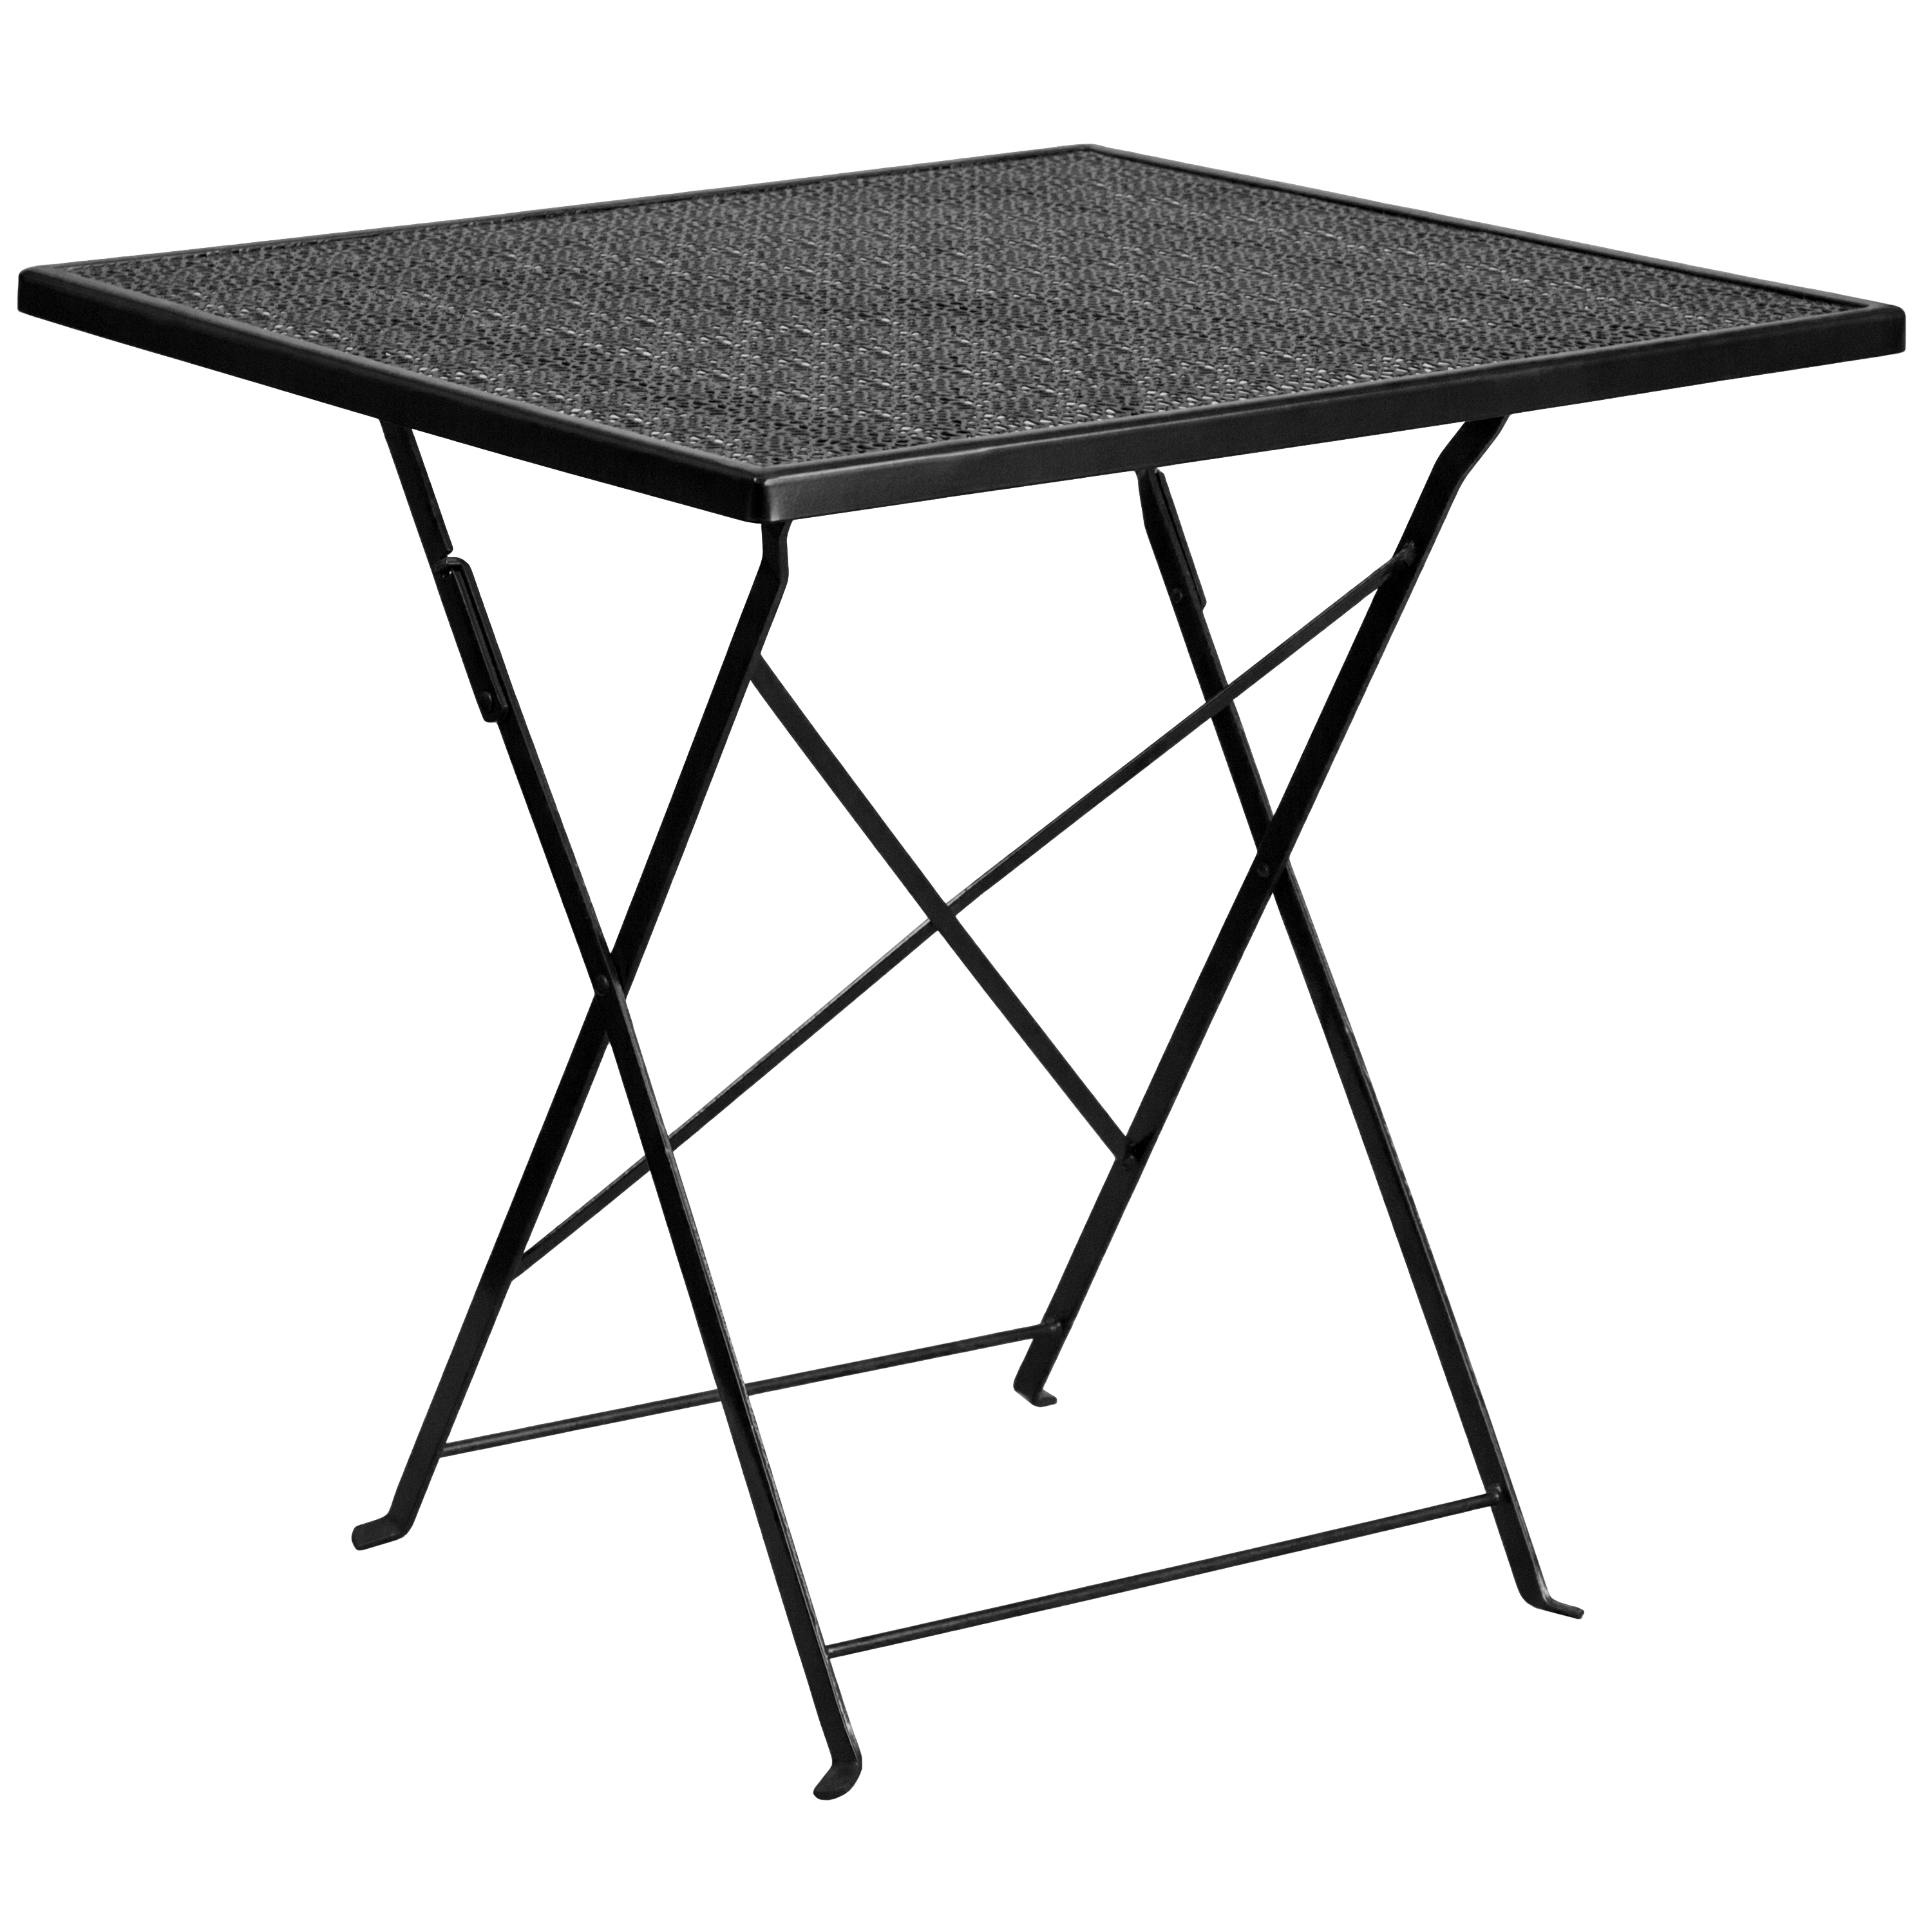 Flash Furniture Oia Commercial Grade 28" Square Black Indoor-Outdoor Steel Folding Patio Table Set with 4 Round Back Chairs - image 4 of 5